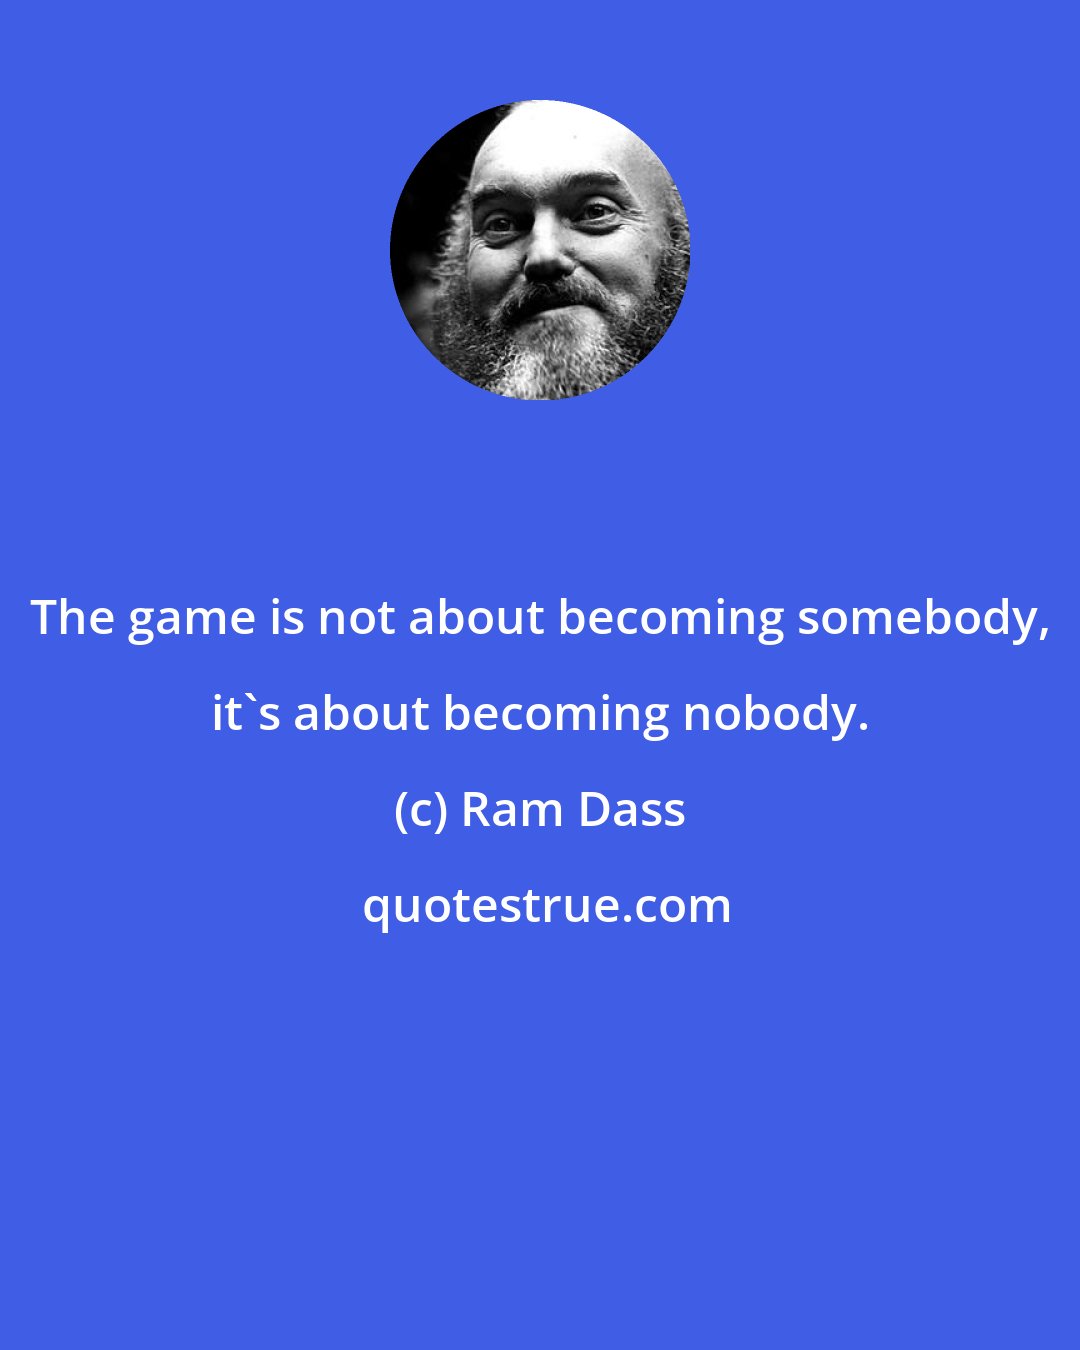 Ram Dass: The game is not about becoming somebody, it's about becoming nobody.